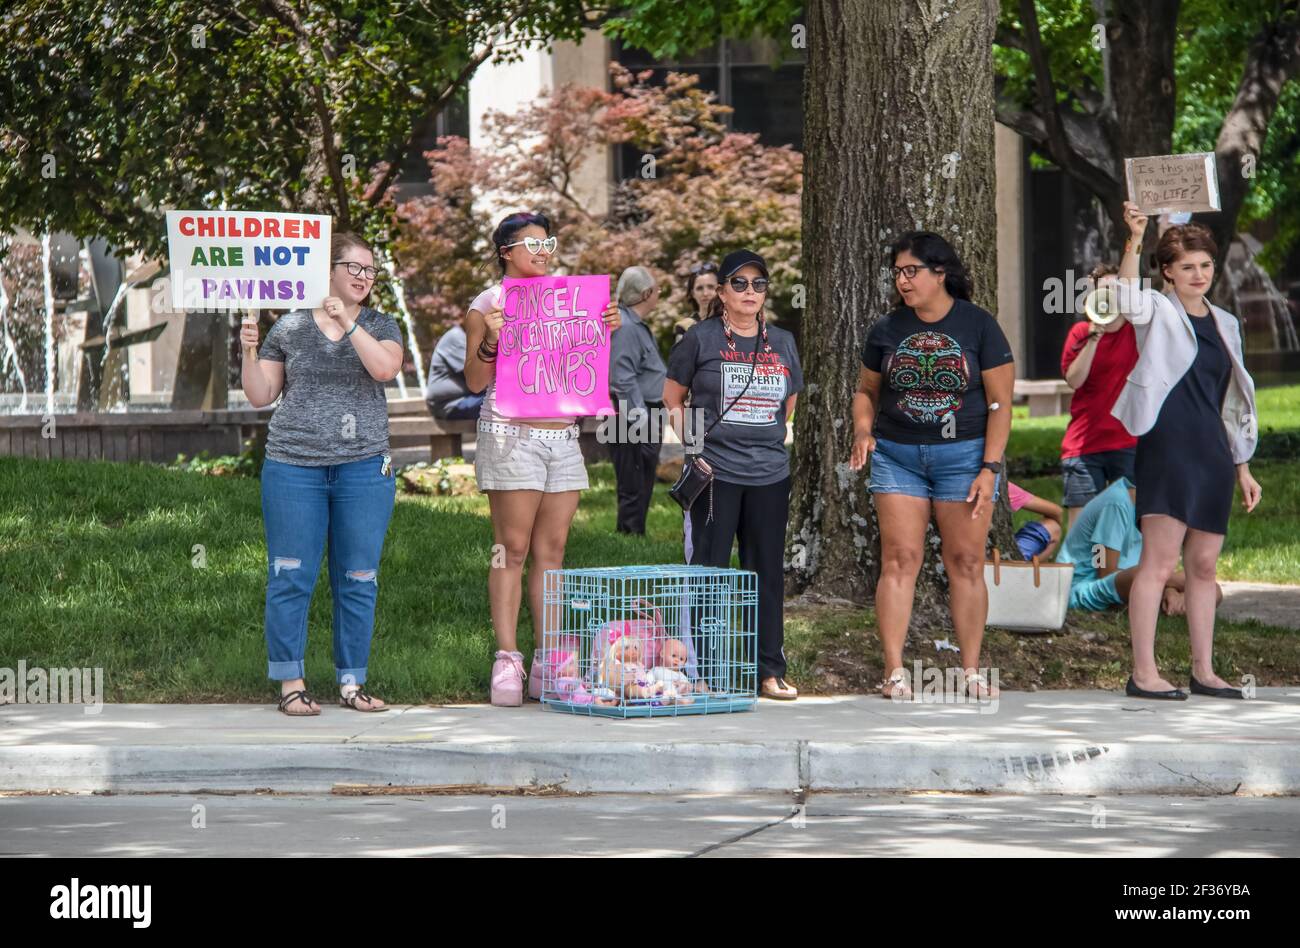 7-2-2019 Tulsa USA -Protesters at park with signs and dolls in a cage-Children are not pawns - is this what it means to be pro-life - Concentration ca Stock Photo